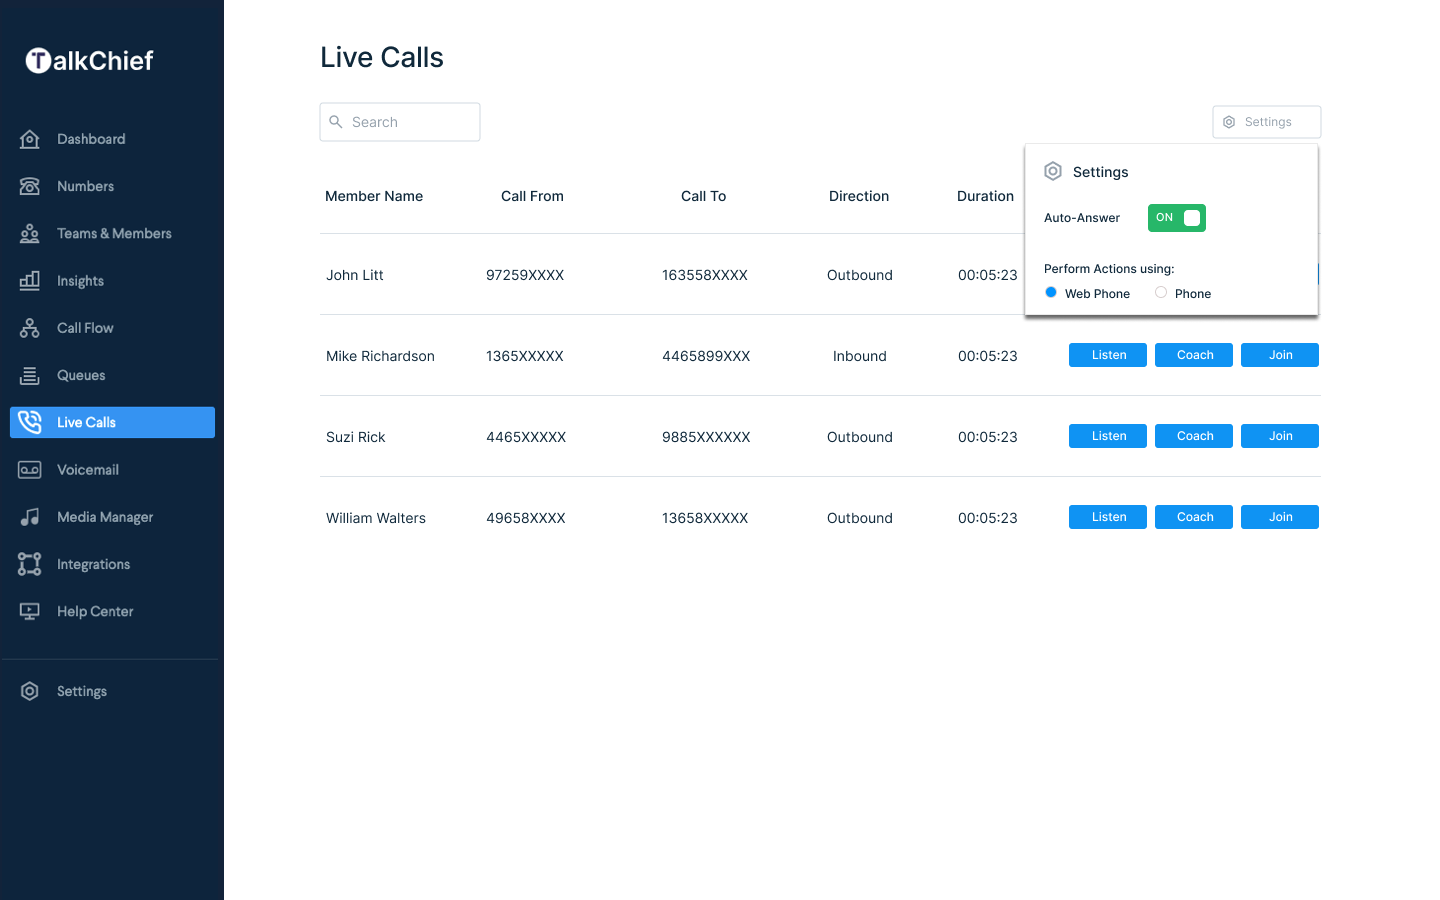 The TalkChief live calls dashboard offers a real-time snapshot of ongoing call activity. It provides instant insights into call volumes, durations, and participant information, allowing users to monitor and manage calls effectively